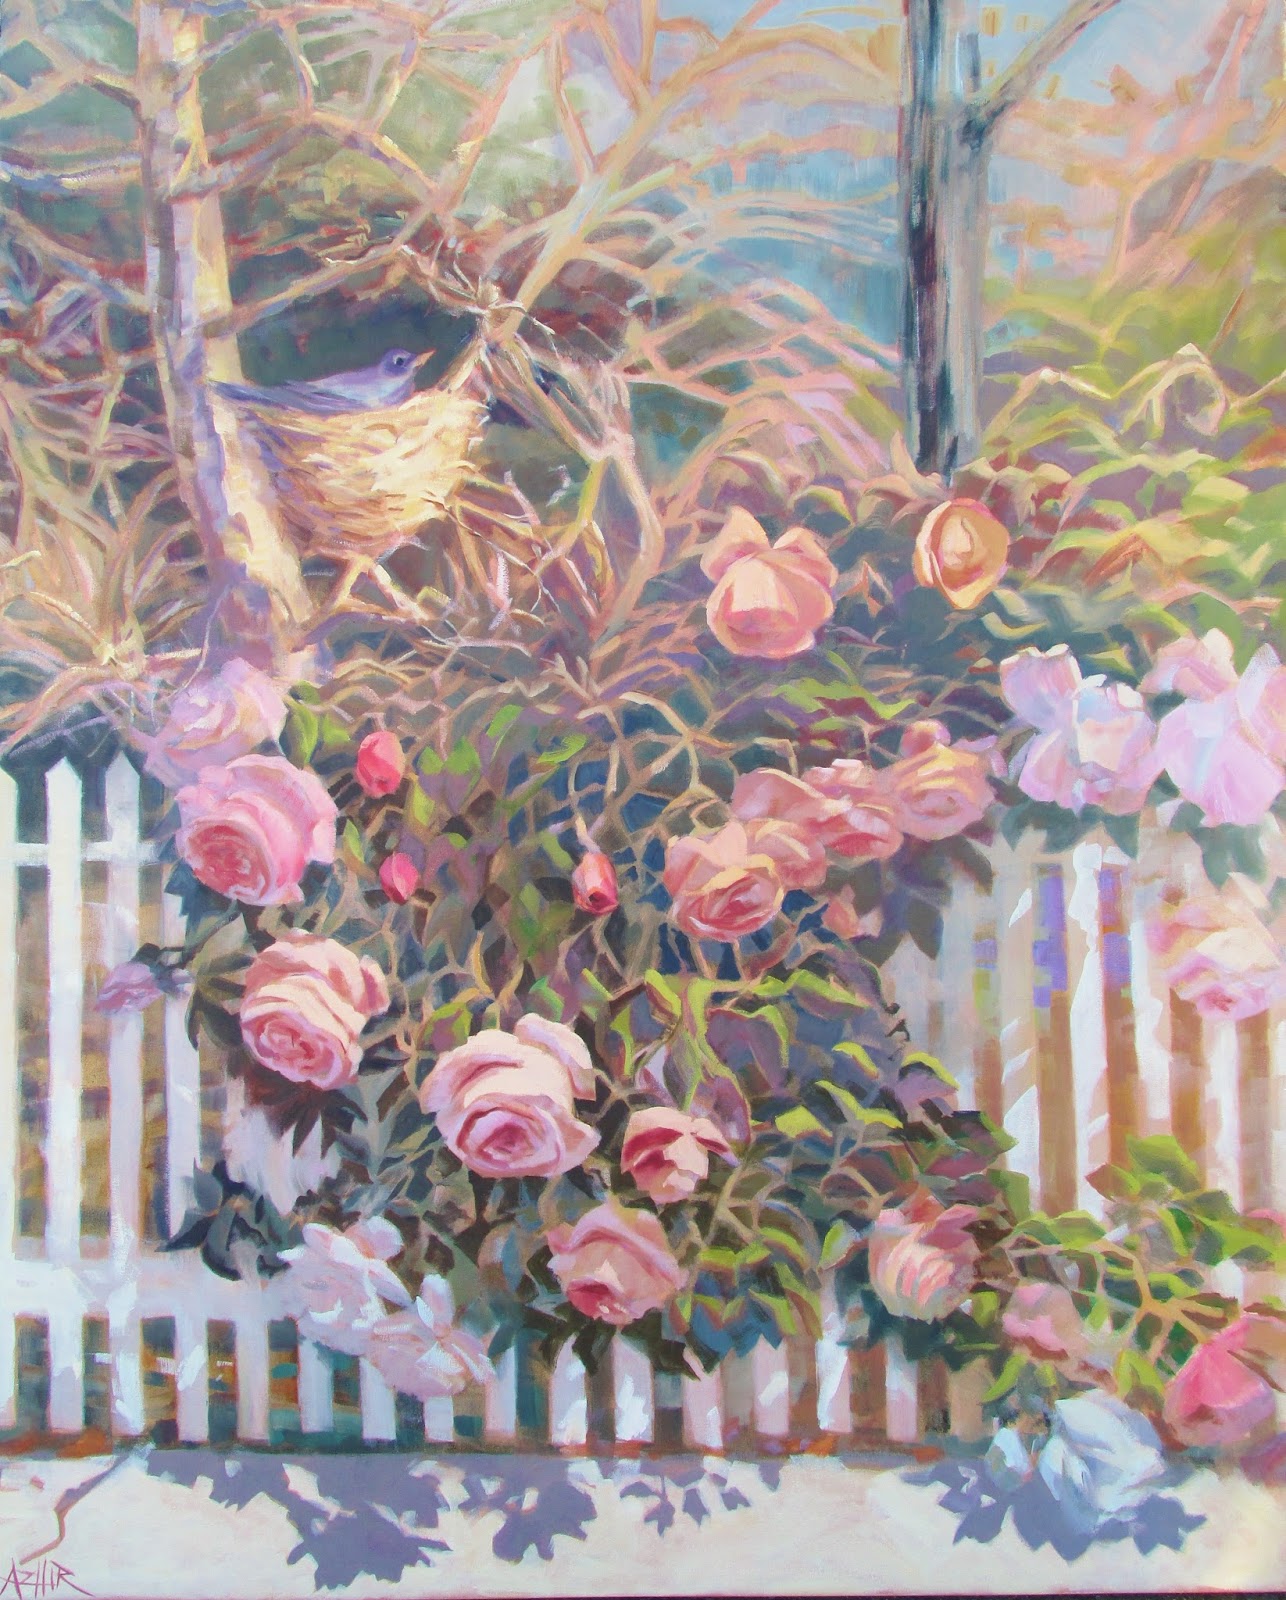 SOLD, Along the Picket Fence, Oil on Canvas, Copyright 2016 Hirschten